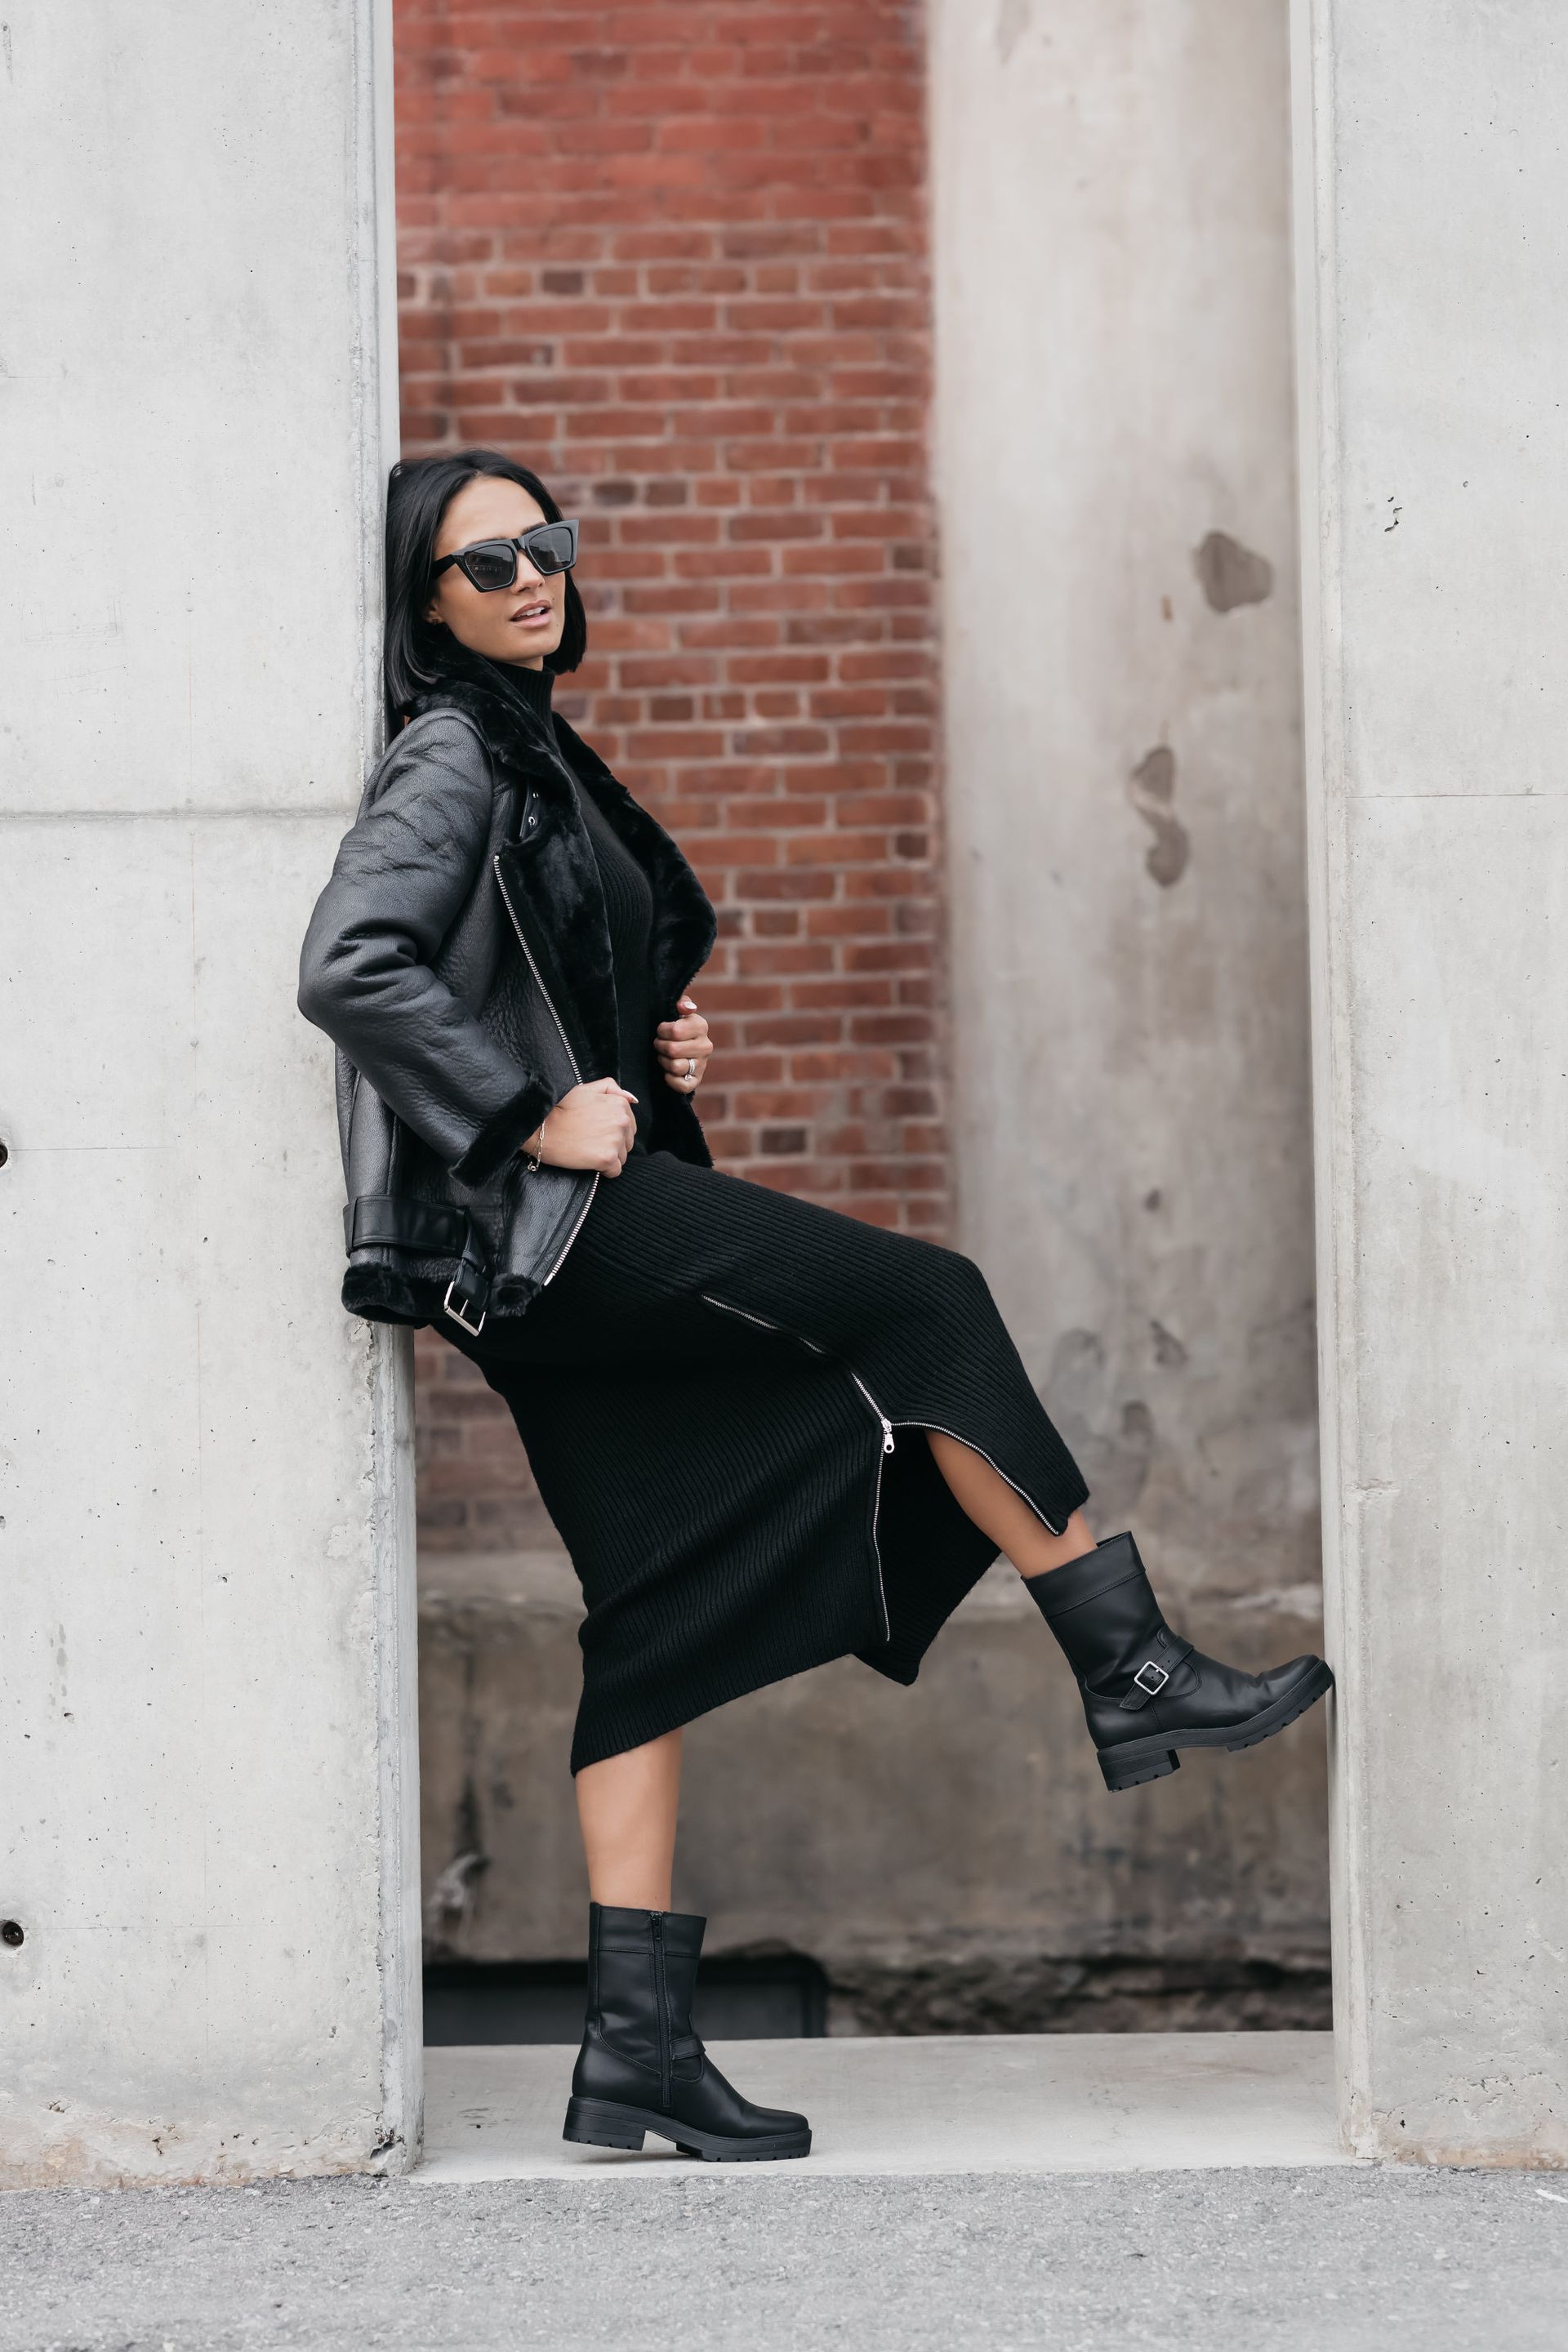 Woman in black leather jacket, skirt, and calf-high boots striking a dynamic pose between two pillars for her personal branding photo.